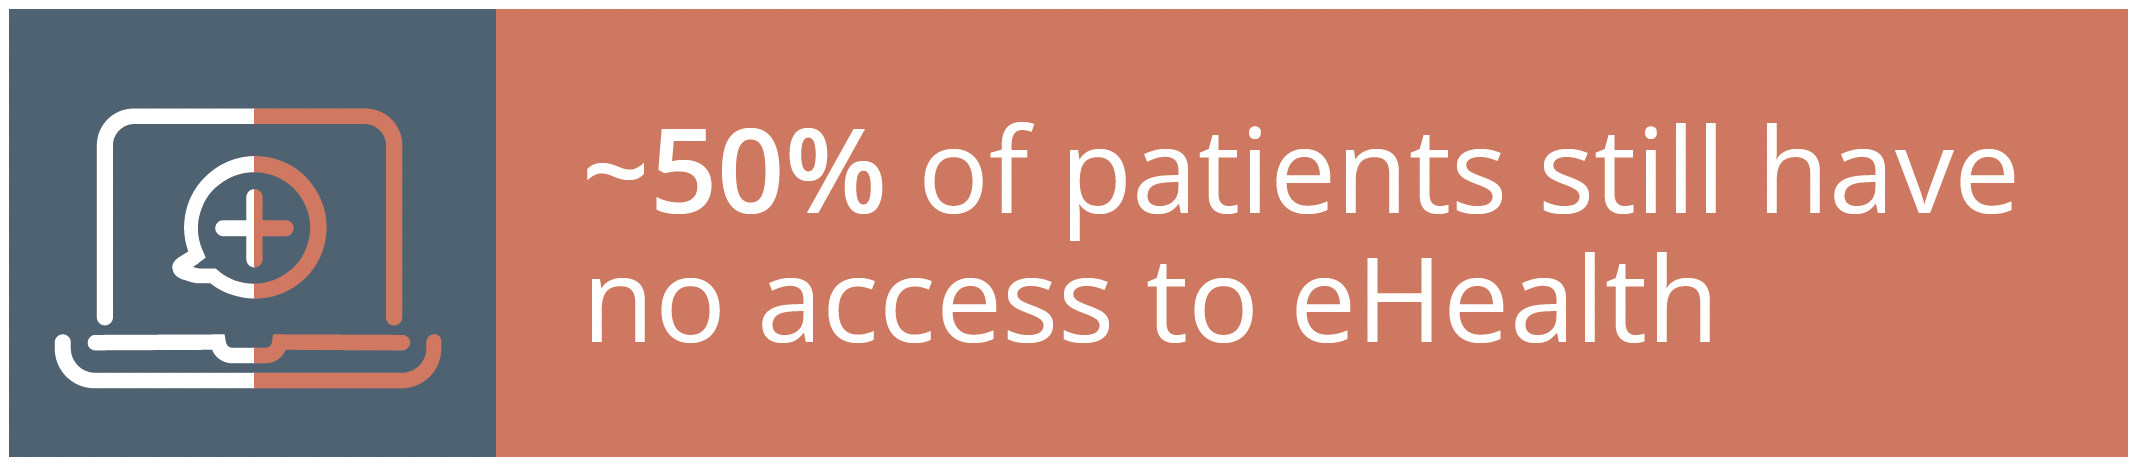 Approximately half of all patients have no access to eHealth